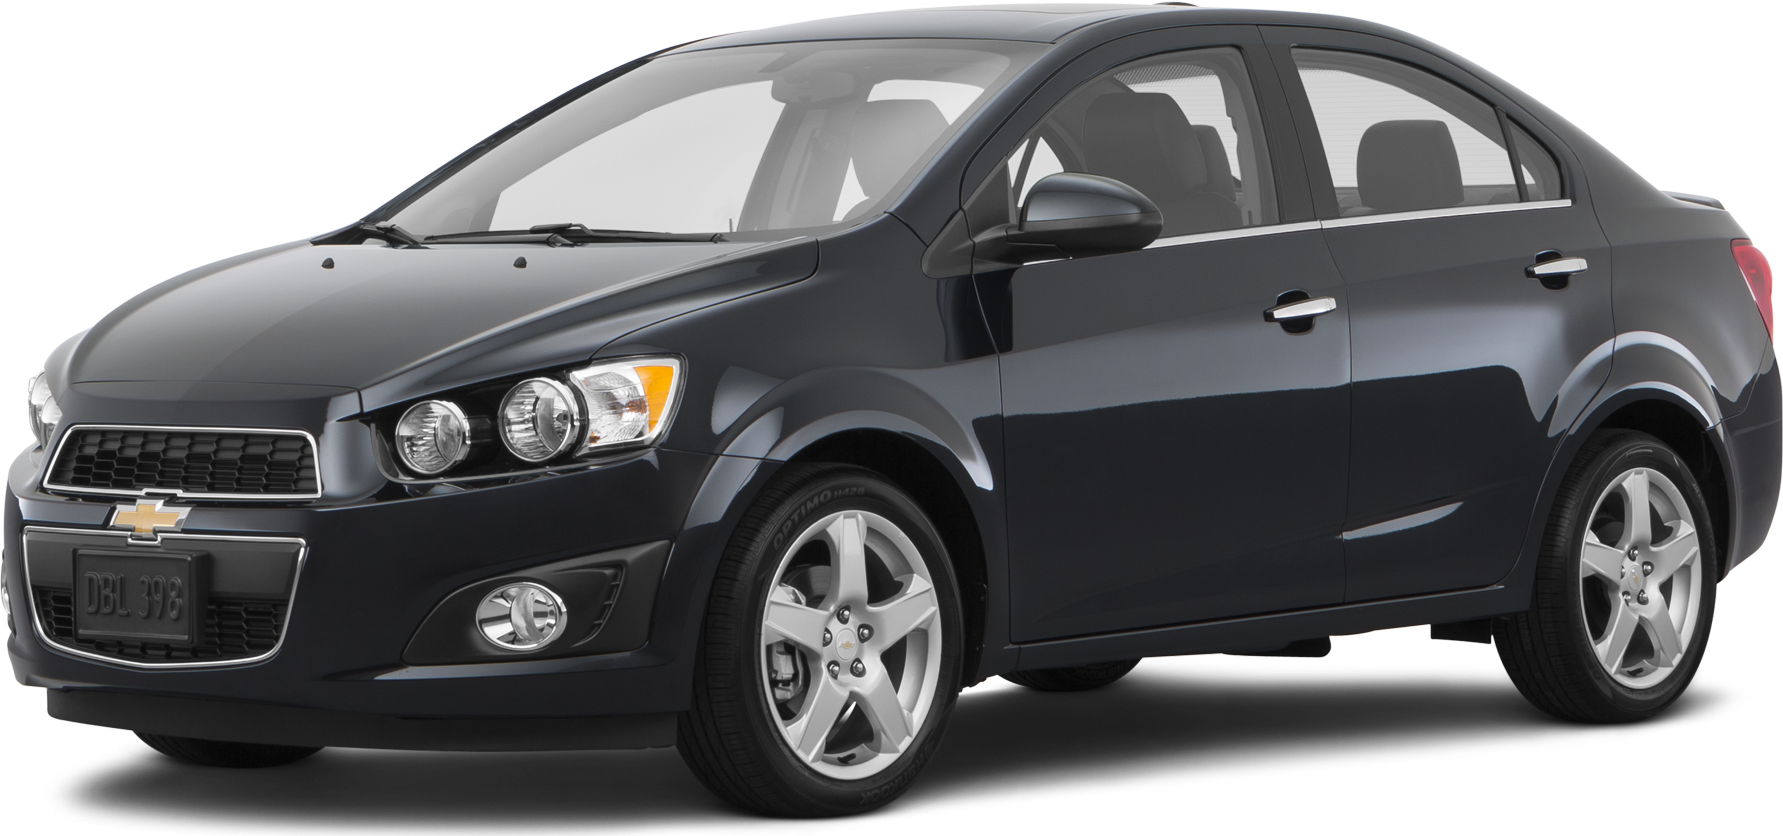 2015 Chevy Sonic Values  Cars for Sale  Kelley Blue Book